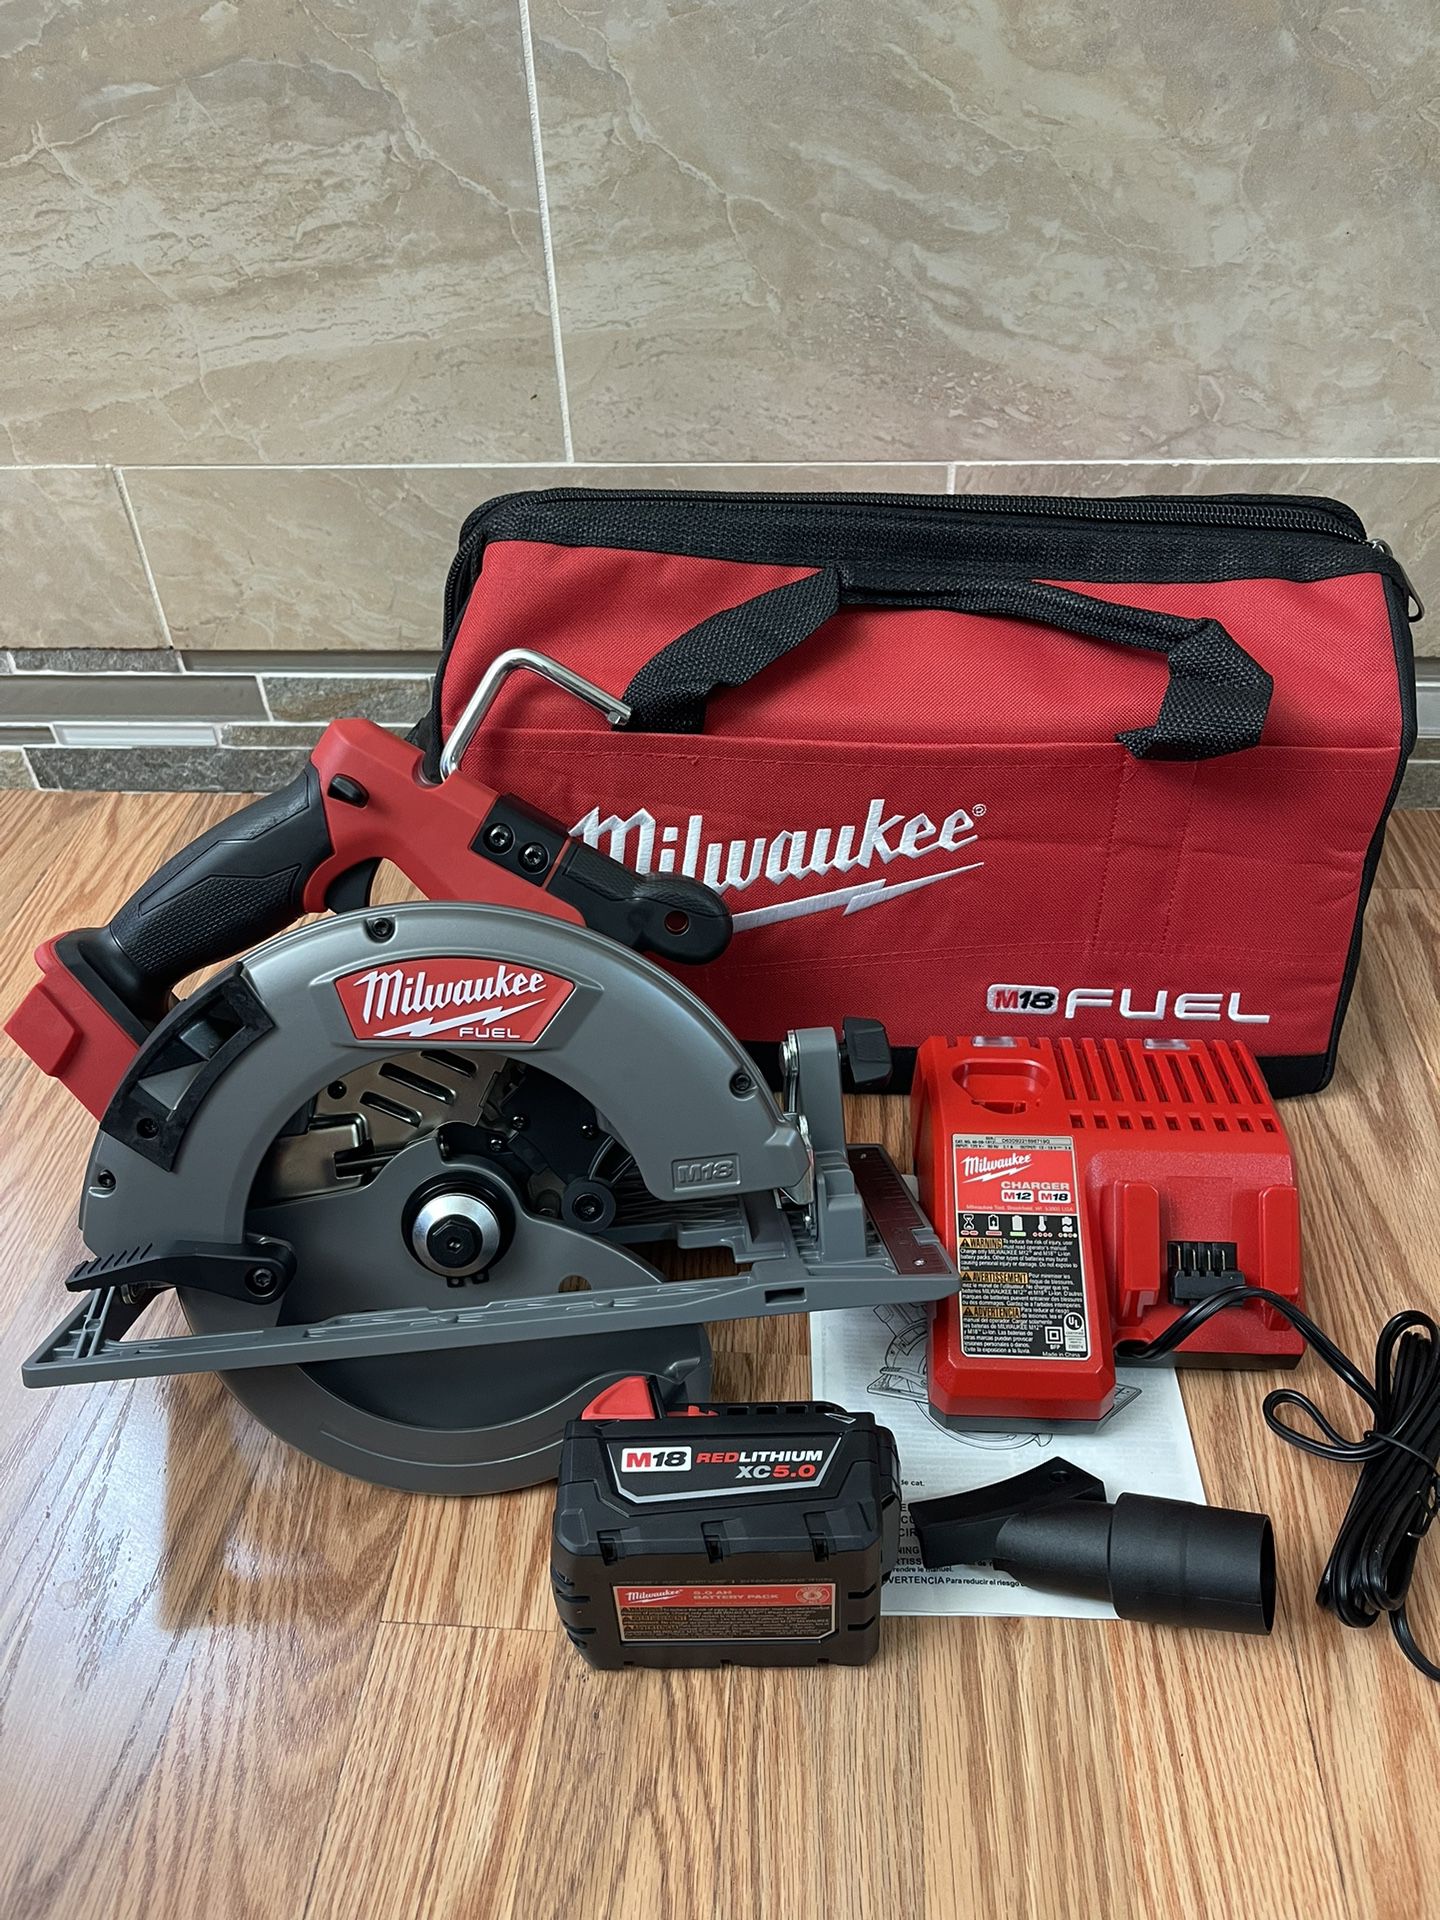 Milwaukee 2732-20 M18 Fuel 18 Volt Lithium-Ion 15 Amp 7-1/4 Inch Cordless Circular  Saw With 5.0Ah Battery. Charger  Bag. for Sale in Portland, OR OfferUp